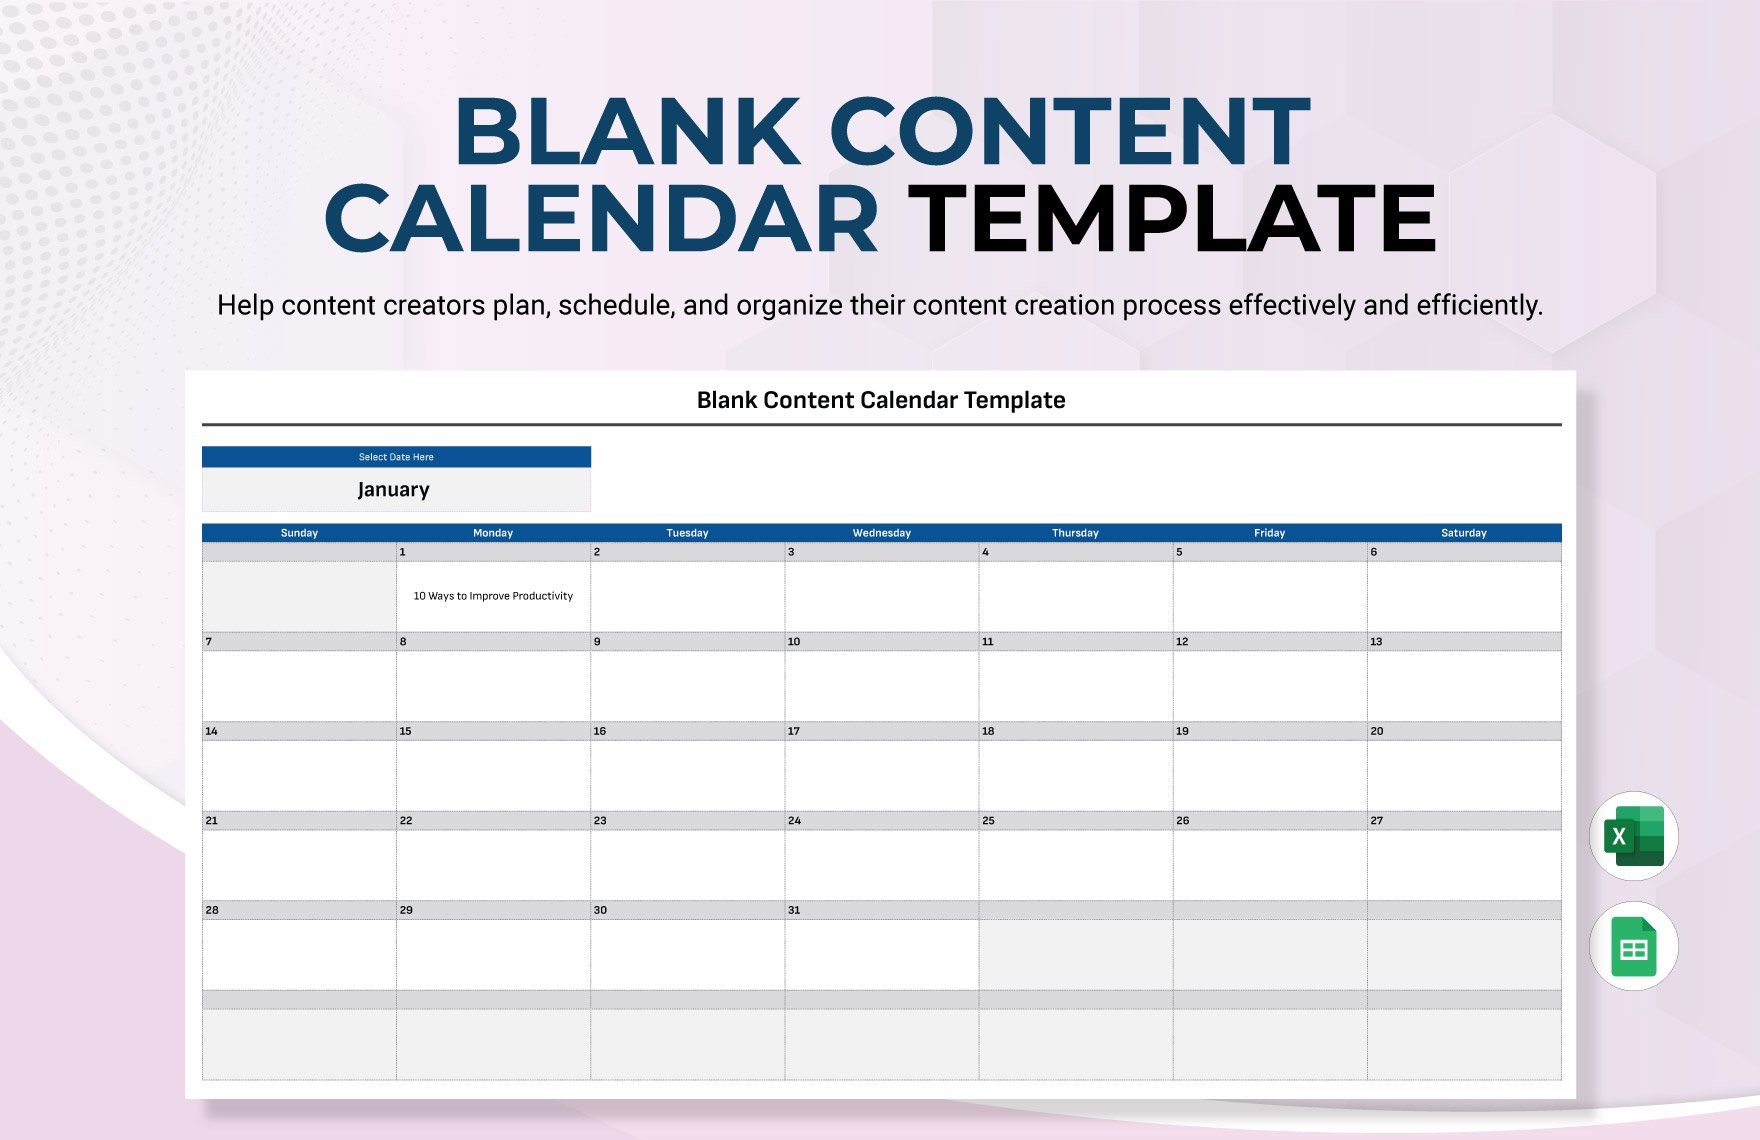 Blank Content Calendar Template in Excel, Google Sheets